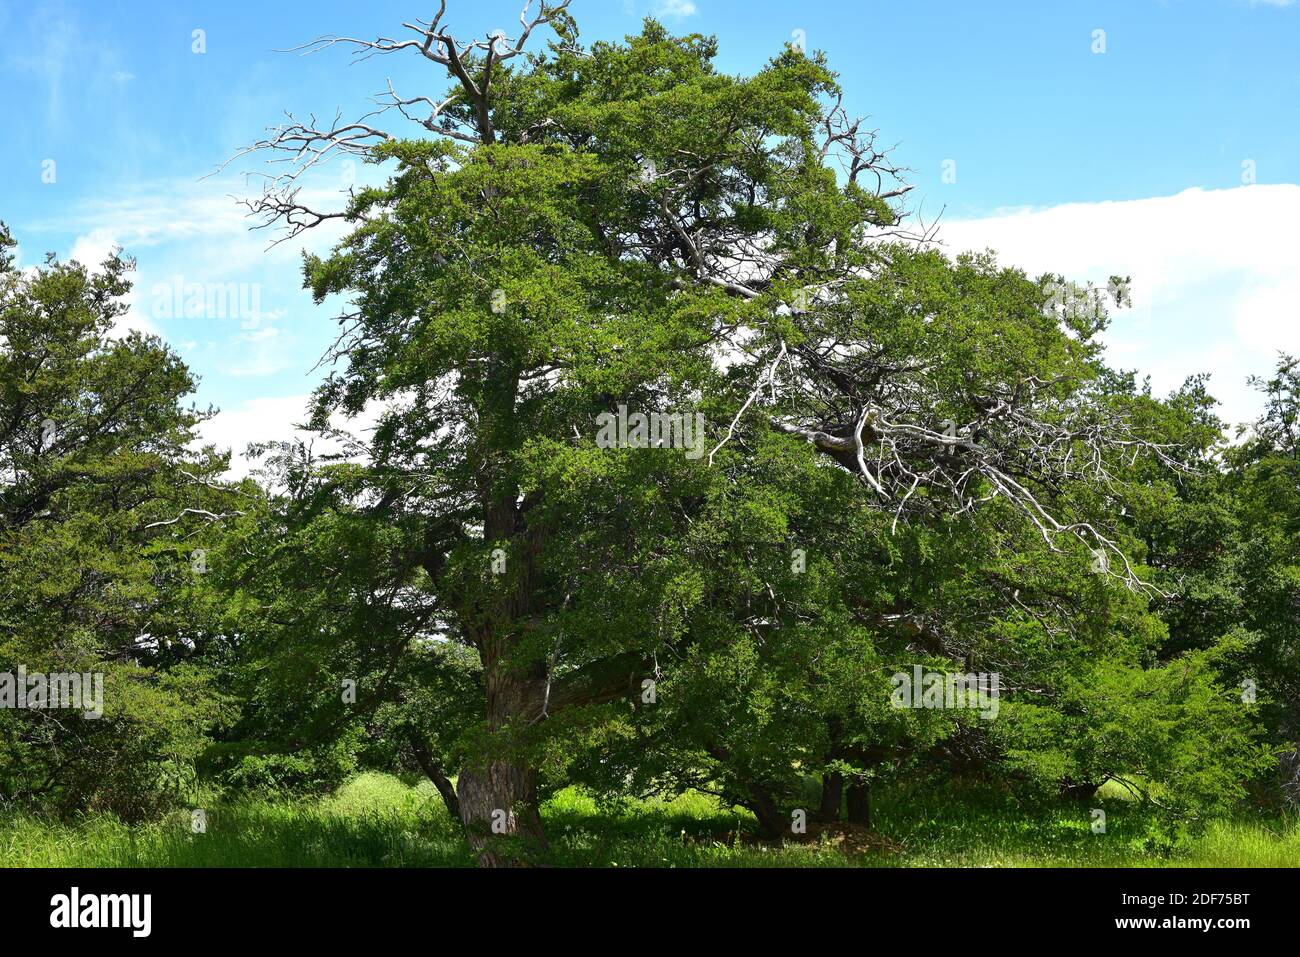 Lenga, haya austral or lenga beech (Nothofagus pumilio) is a deciduous tree native to southern Andes of Chile and Argentina. This photo was taken in Stock Photo